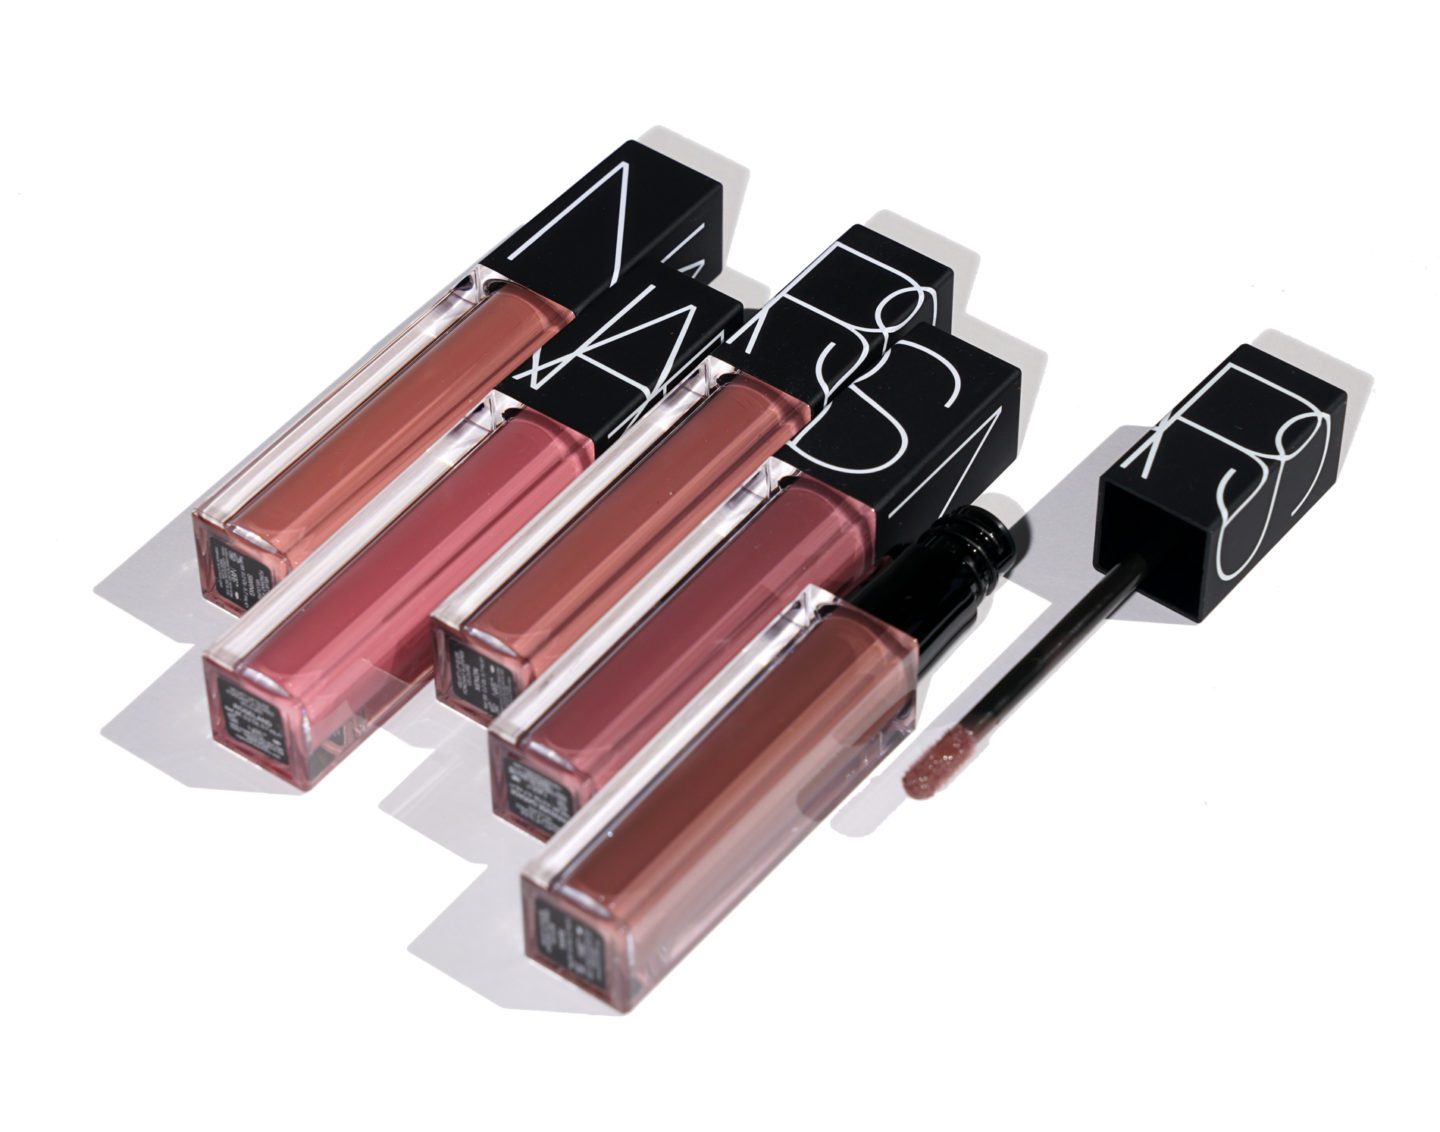 NARS Velvet Lip Glide New Shades Swing, Roseland, Xenon, Paradise Garage and Mars review + swatches